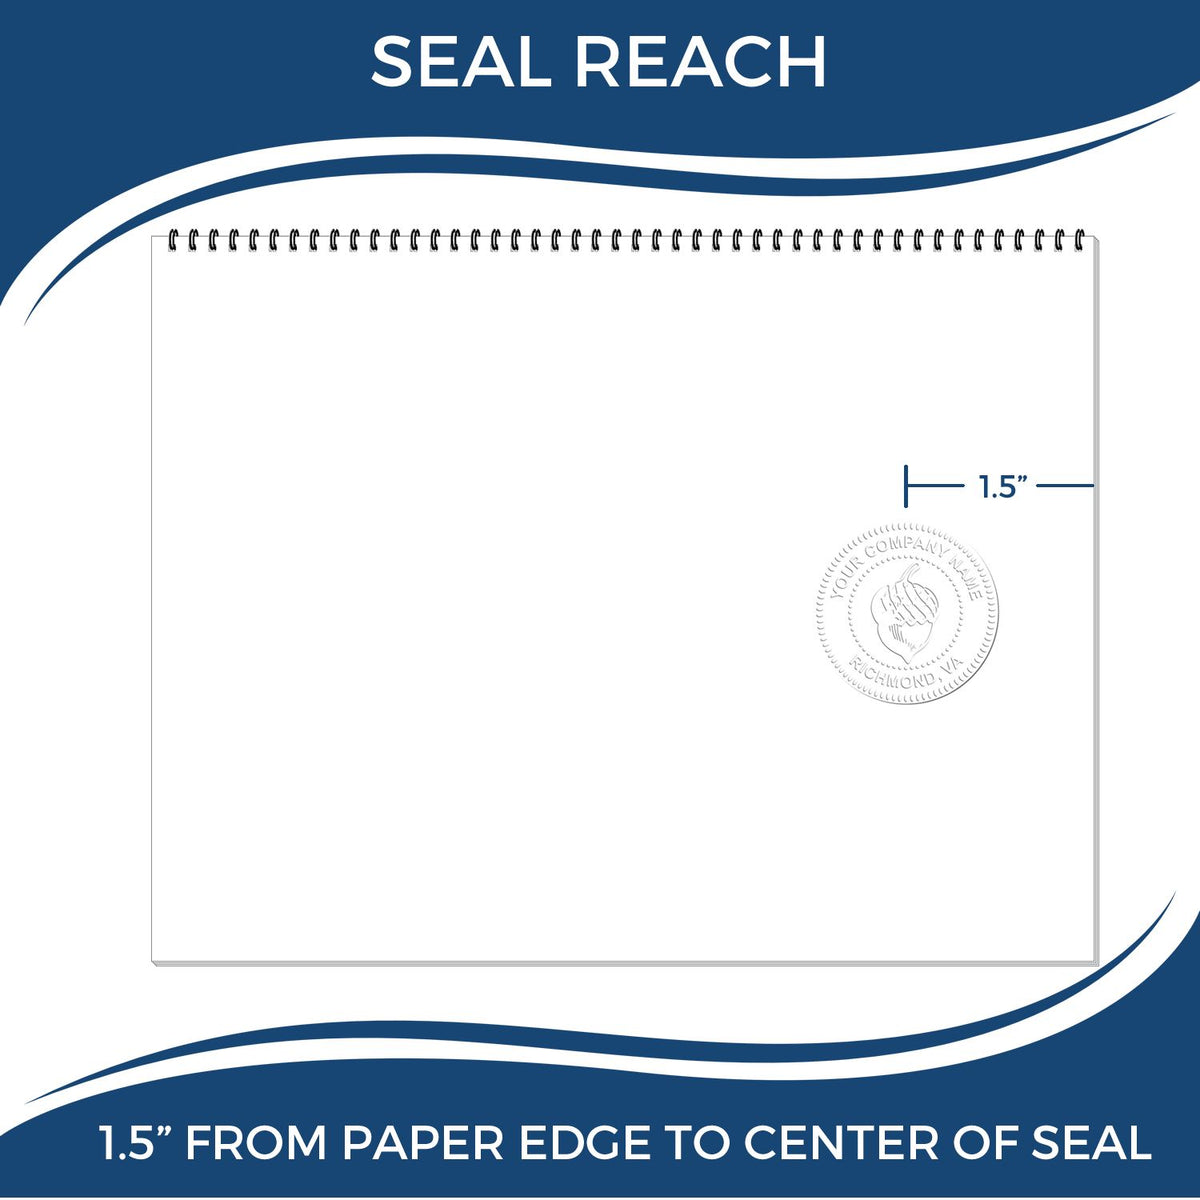 An infographic showing the seal reach which is represented by a ruler and a miniature seal image of the State of Delaware Architectural Seal Embosser